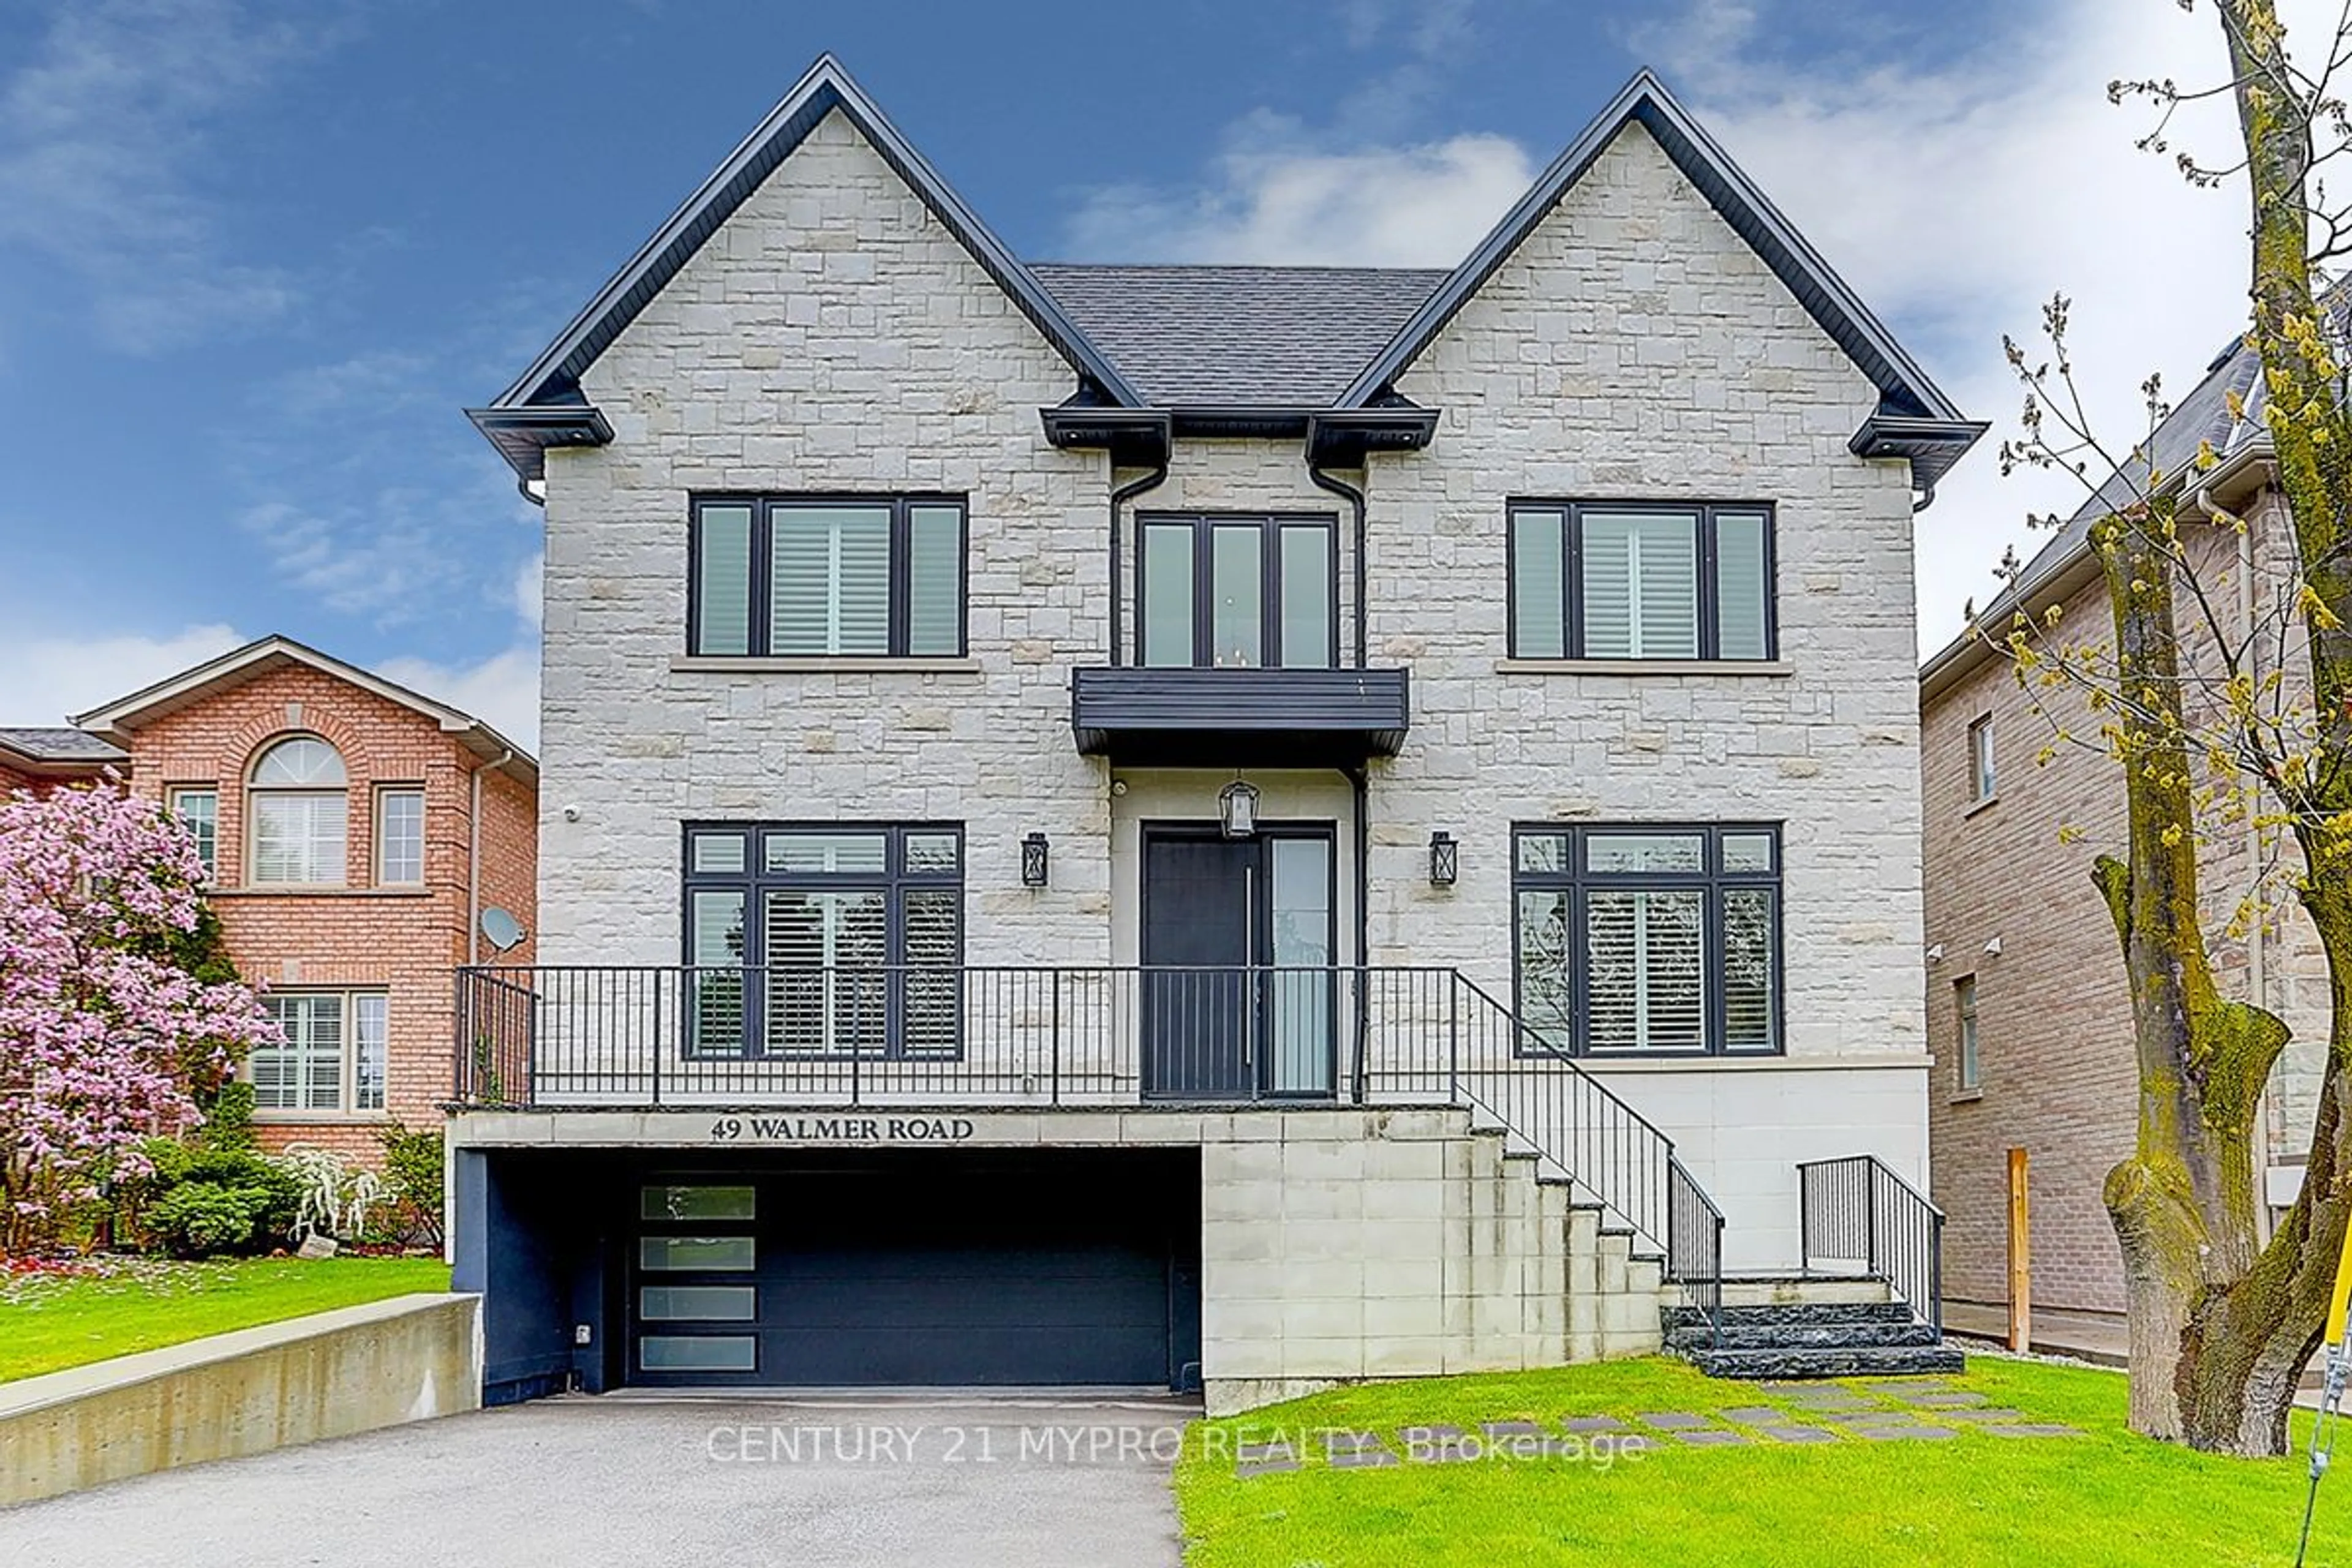 Home with brick exterior material for 49 Walmer Rd, Richmond Hill Ontario L4C 3W9